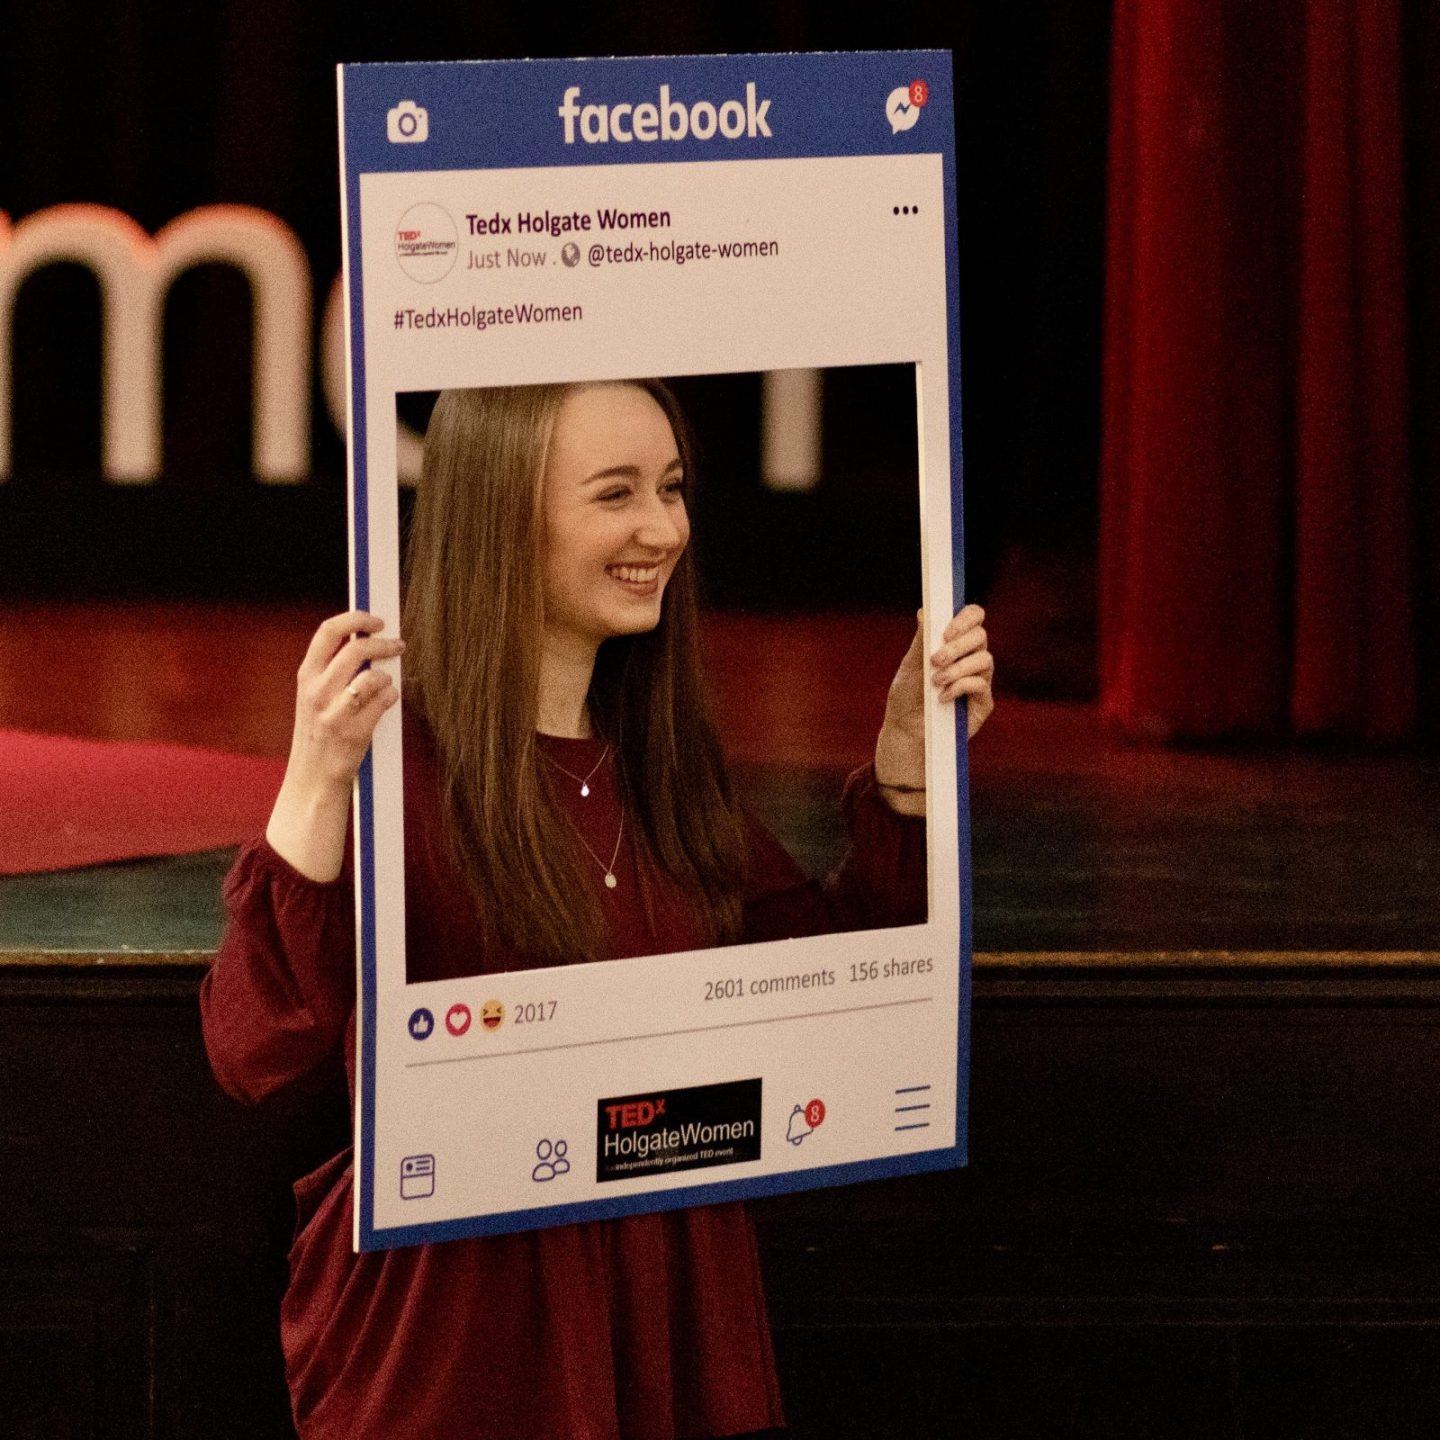 pippa stood holding up social media-style facebook photo board and smiling as somebody else takes a picture of her